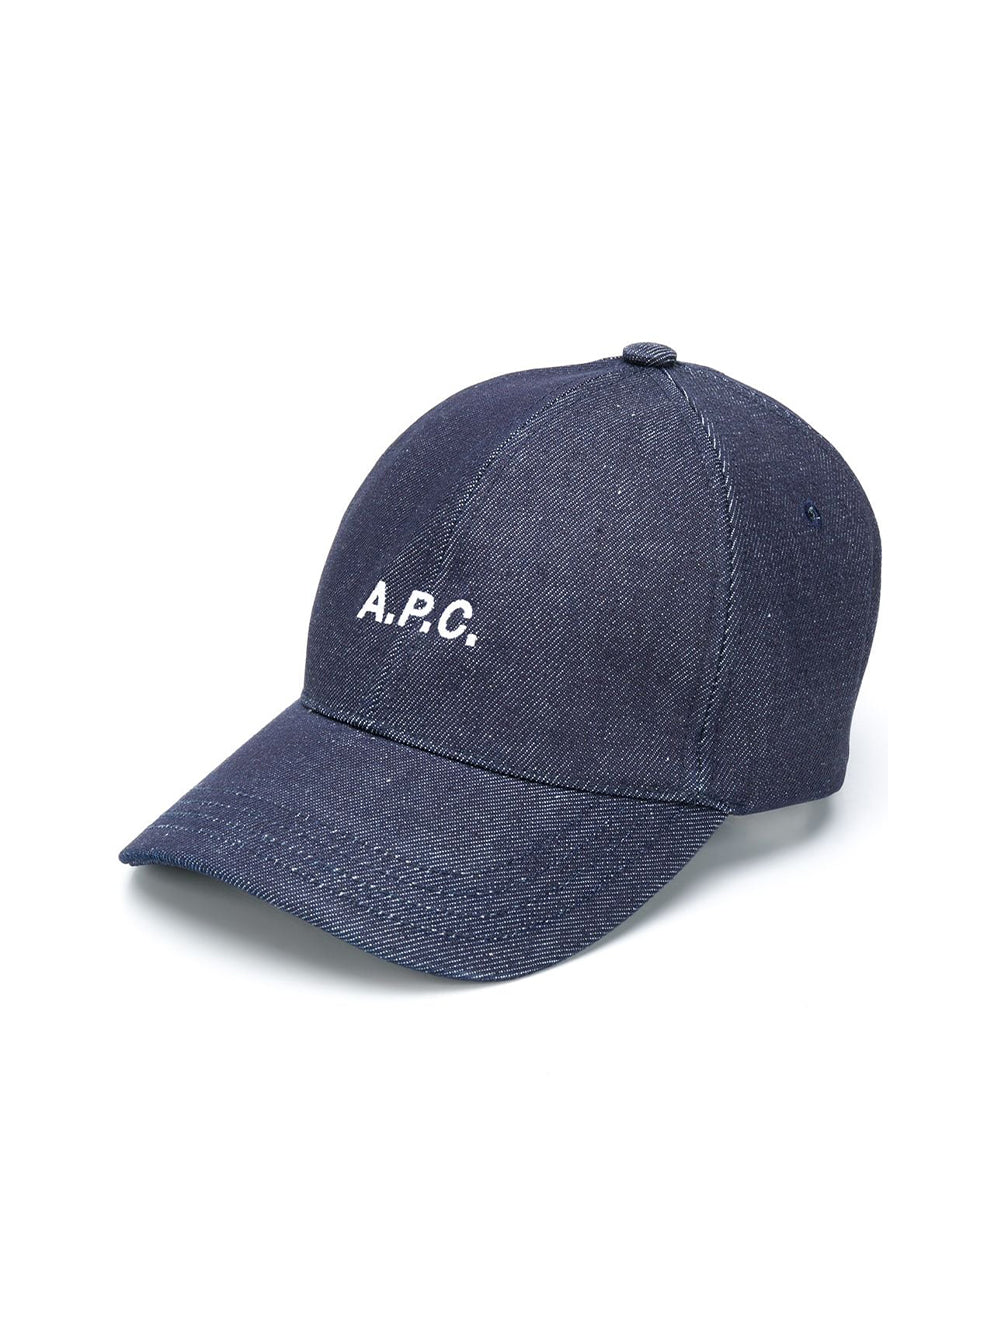 Denim Baseball Cap With Embroidered A.PC Logo